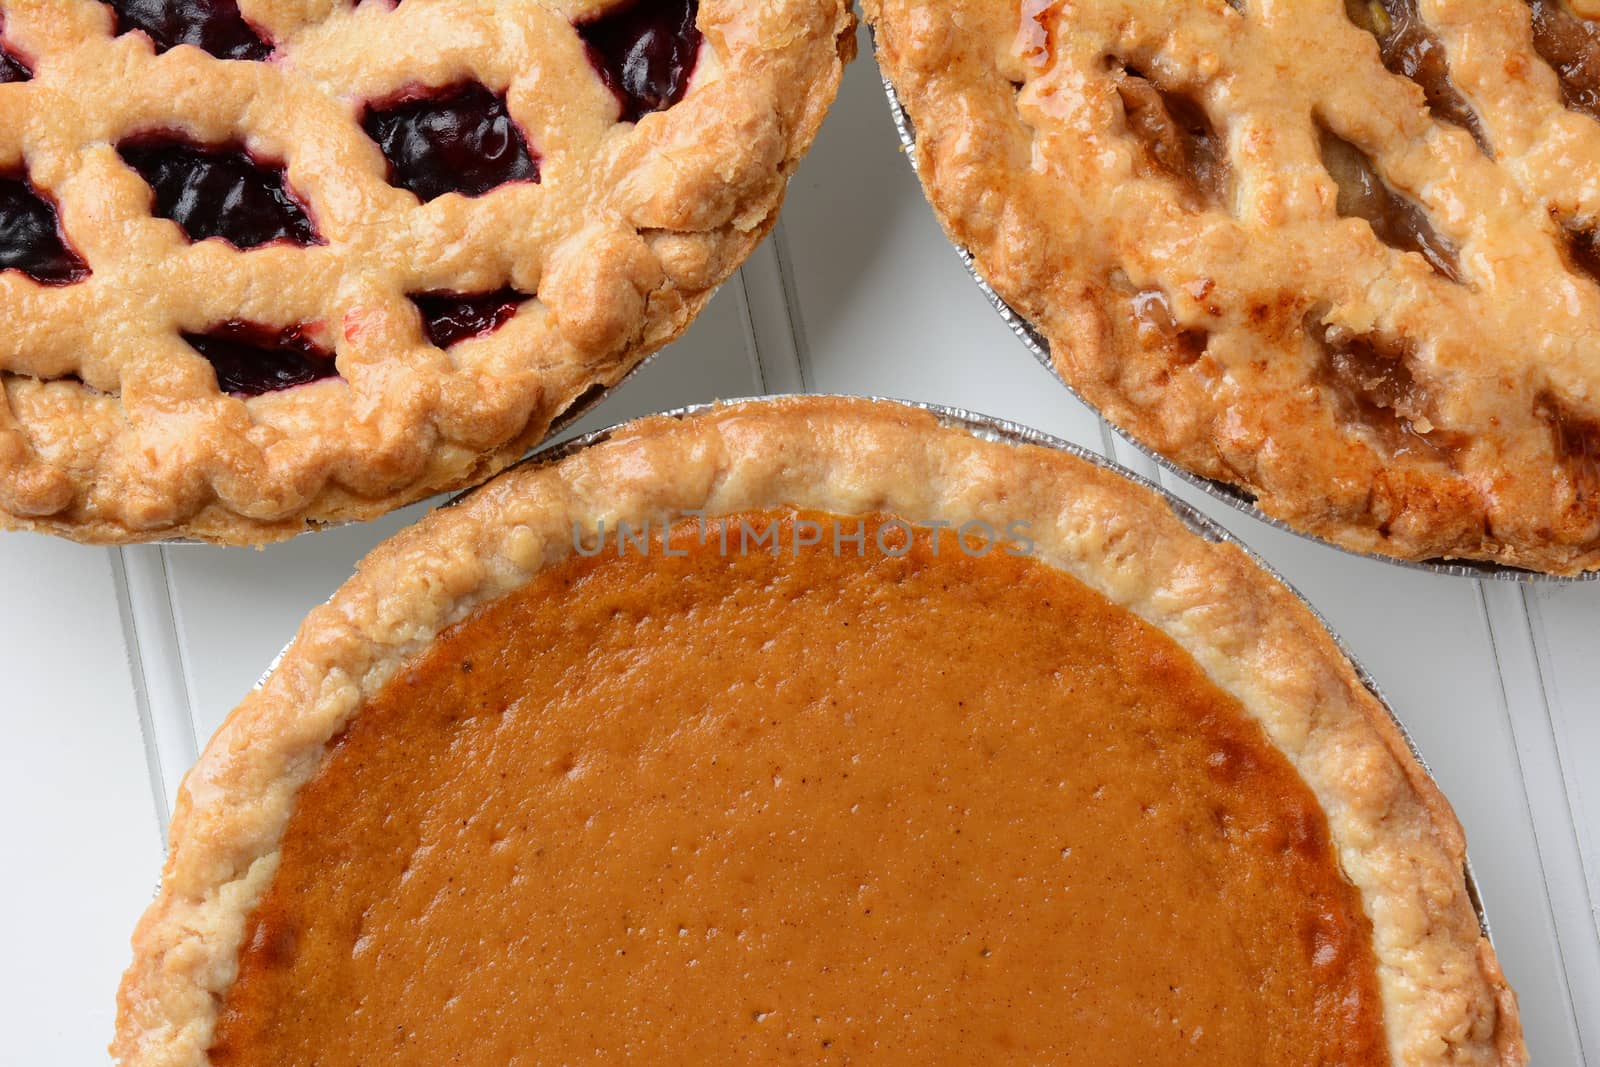 Closeup of three different fresh baked holiday pies.  Pumpkin, apple and a berry pie are shown.